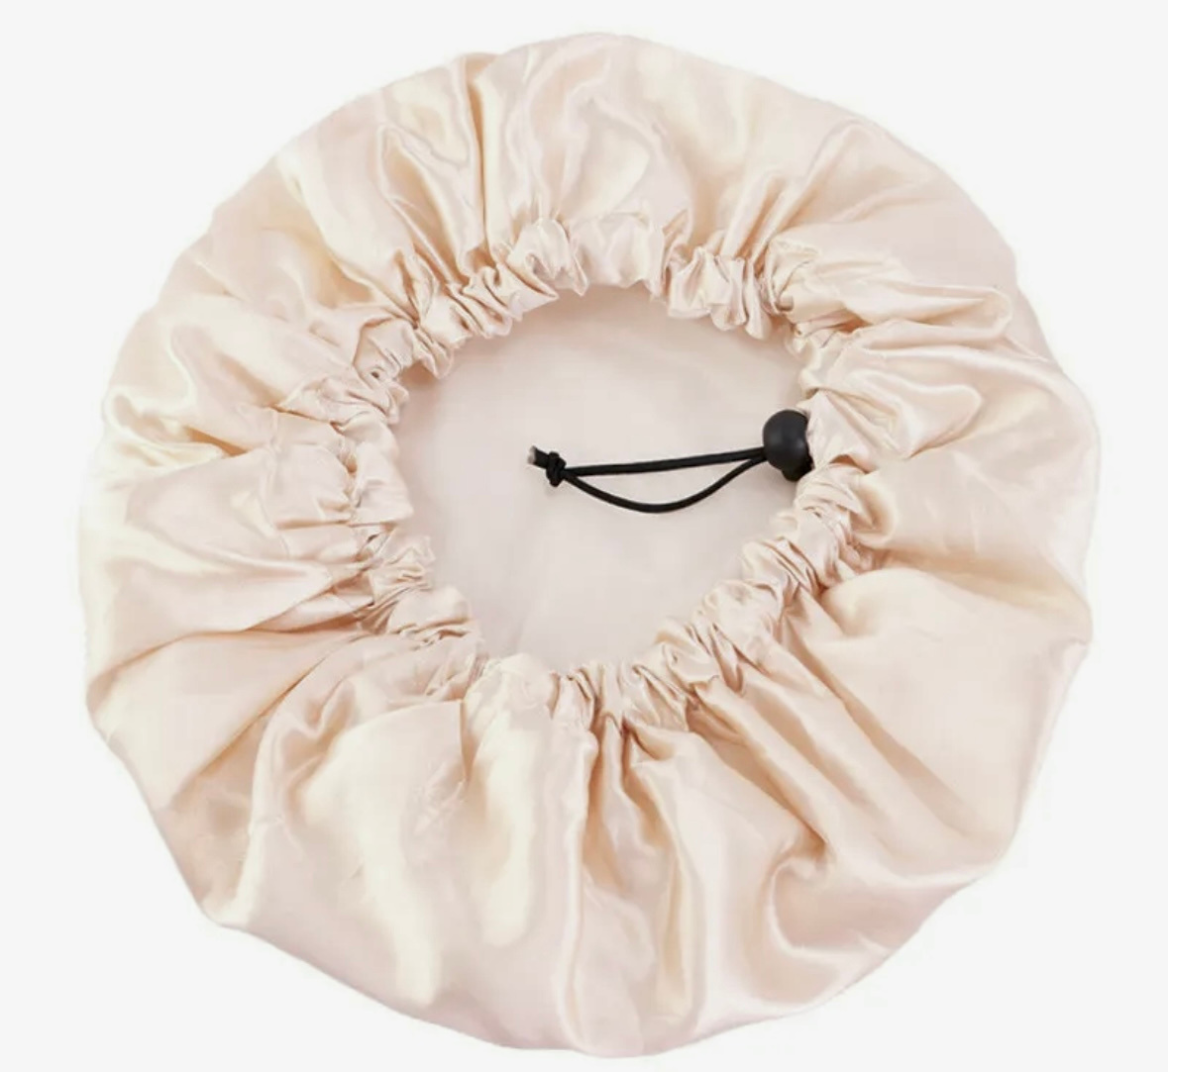 The Adjustable Satin Lined Luxury Shower Cap